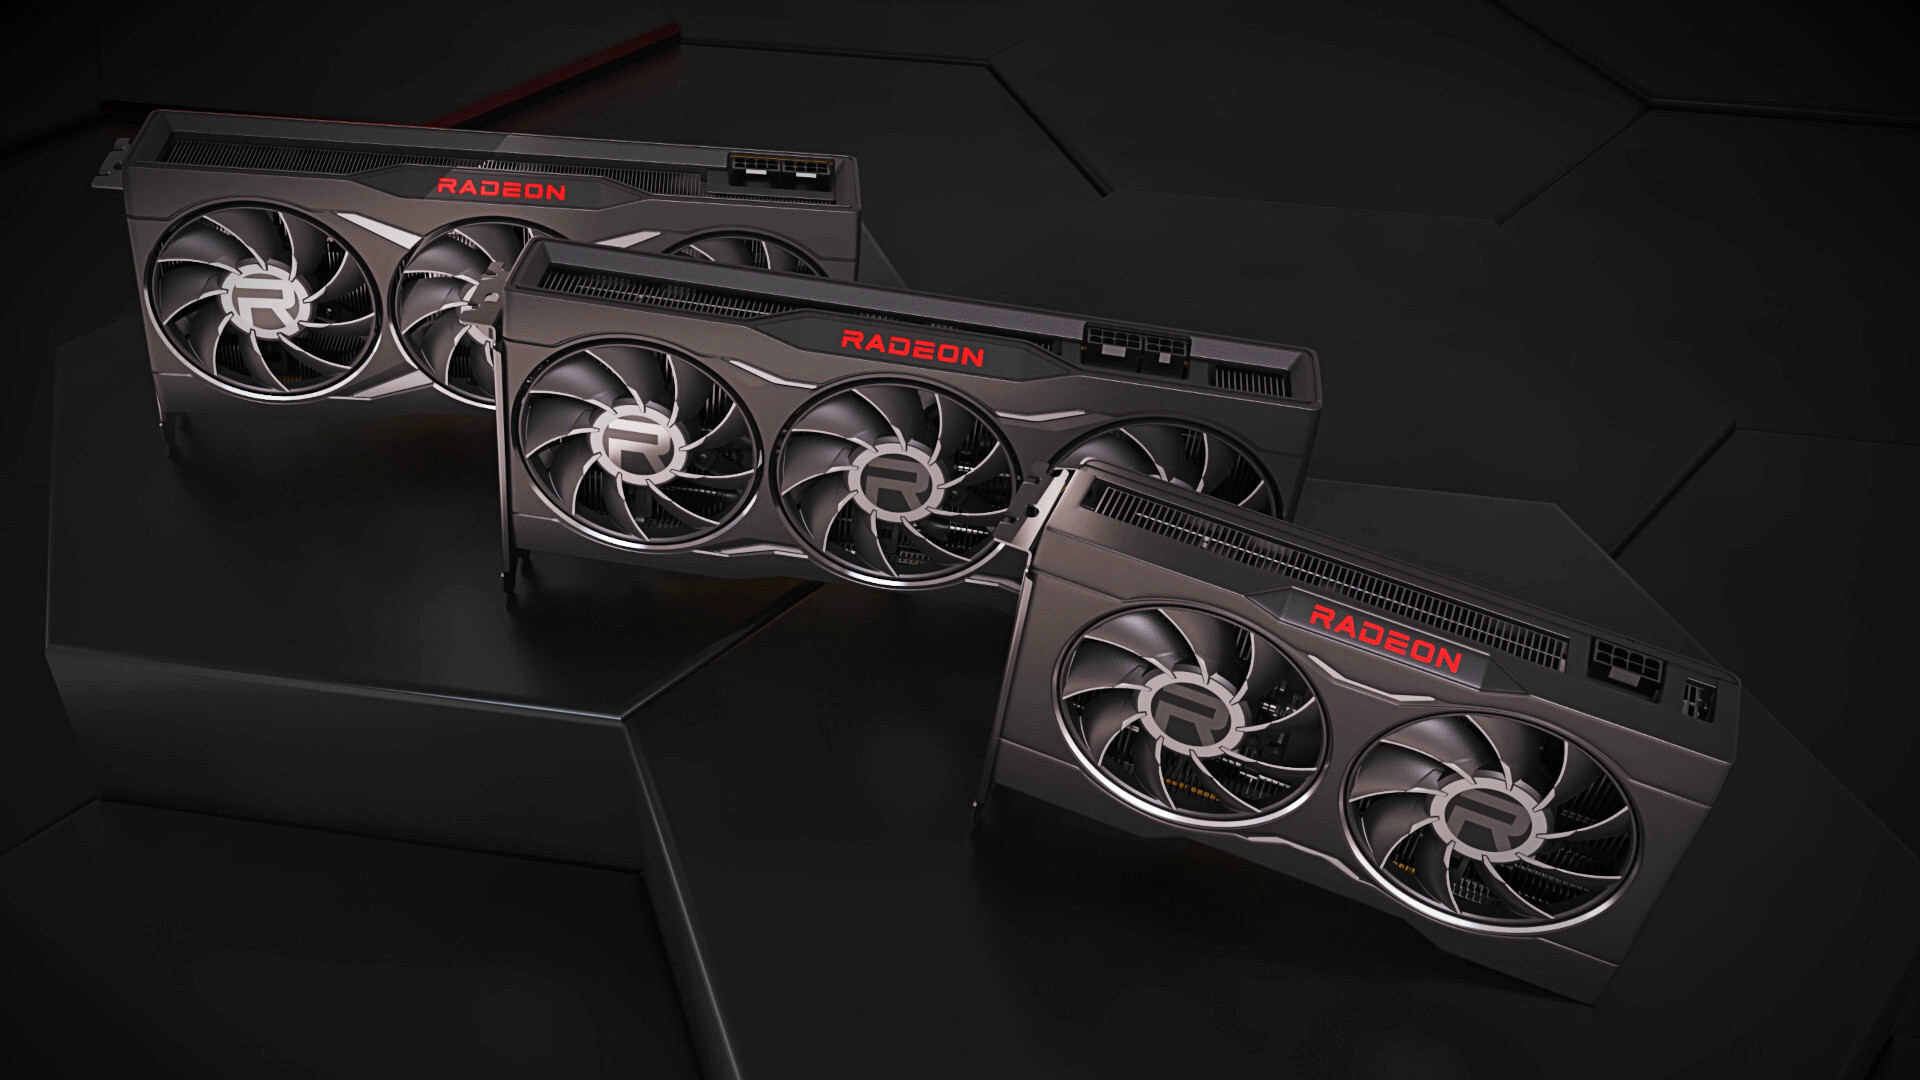 RX 7700 XT Matches RTX 4070, RX 6800 Performance In Leaked Time Spy Score